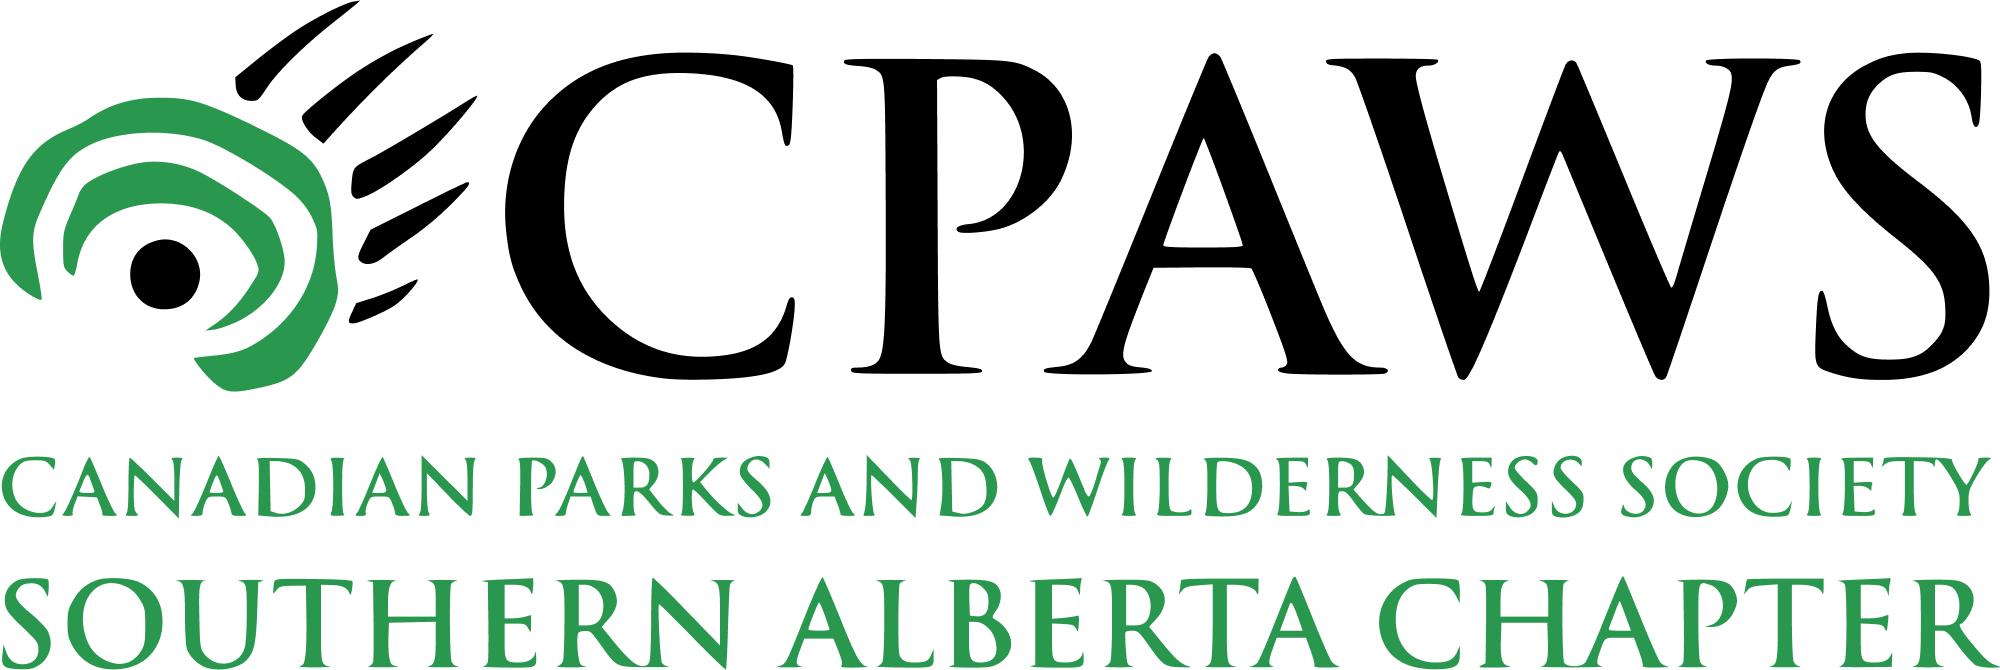 Logo for Canadian Parks and Wilderness Society (CPAWS) on a transparent background